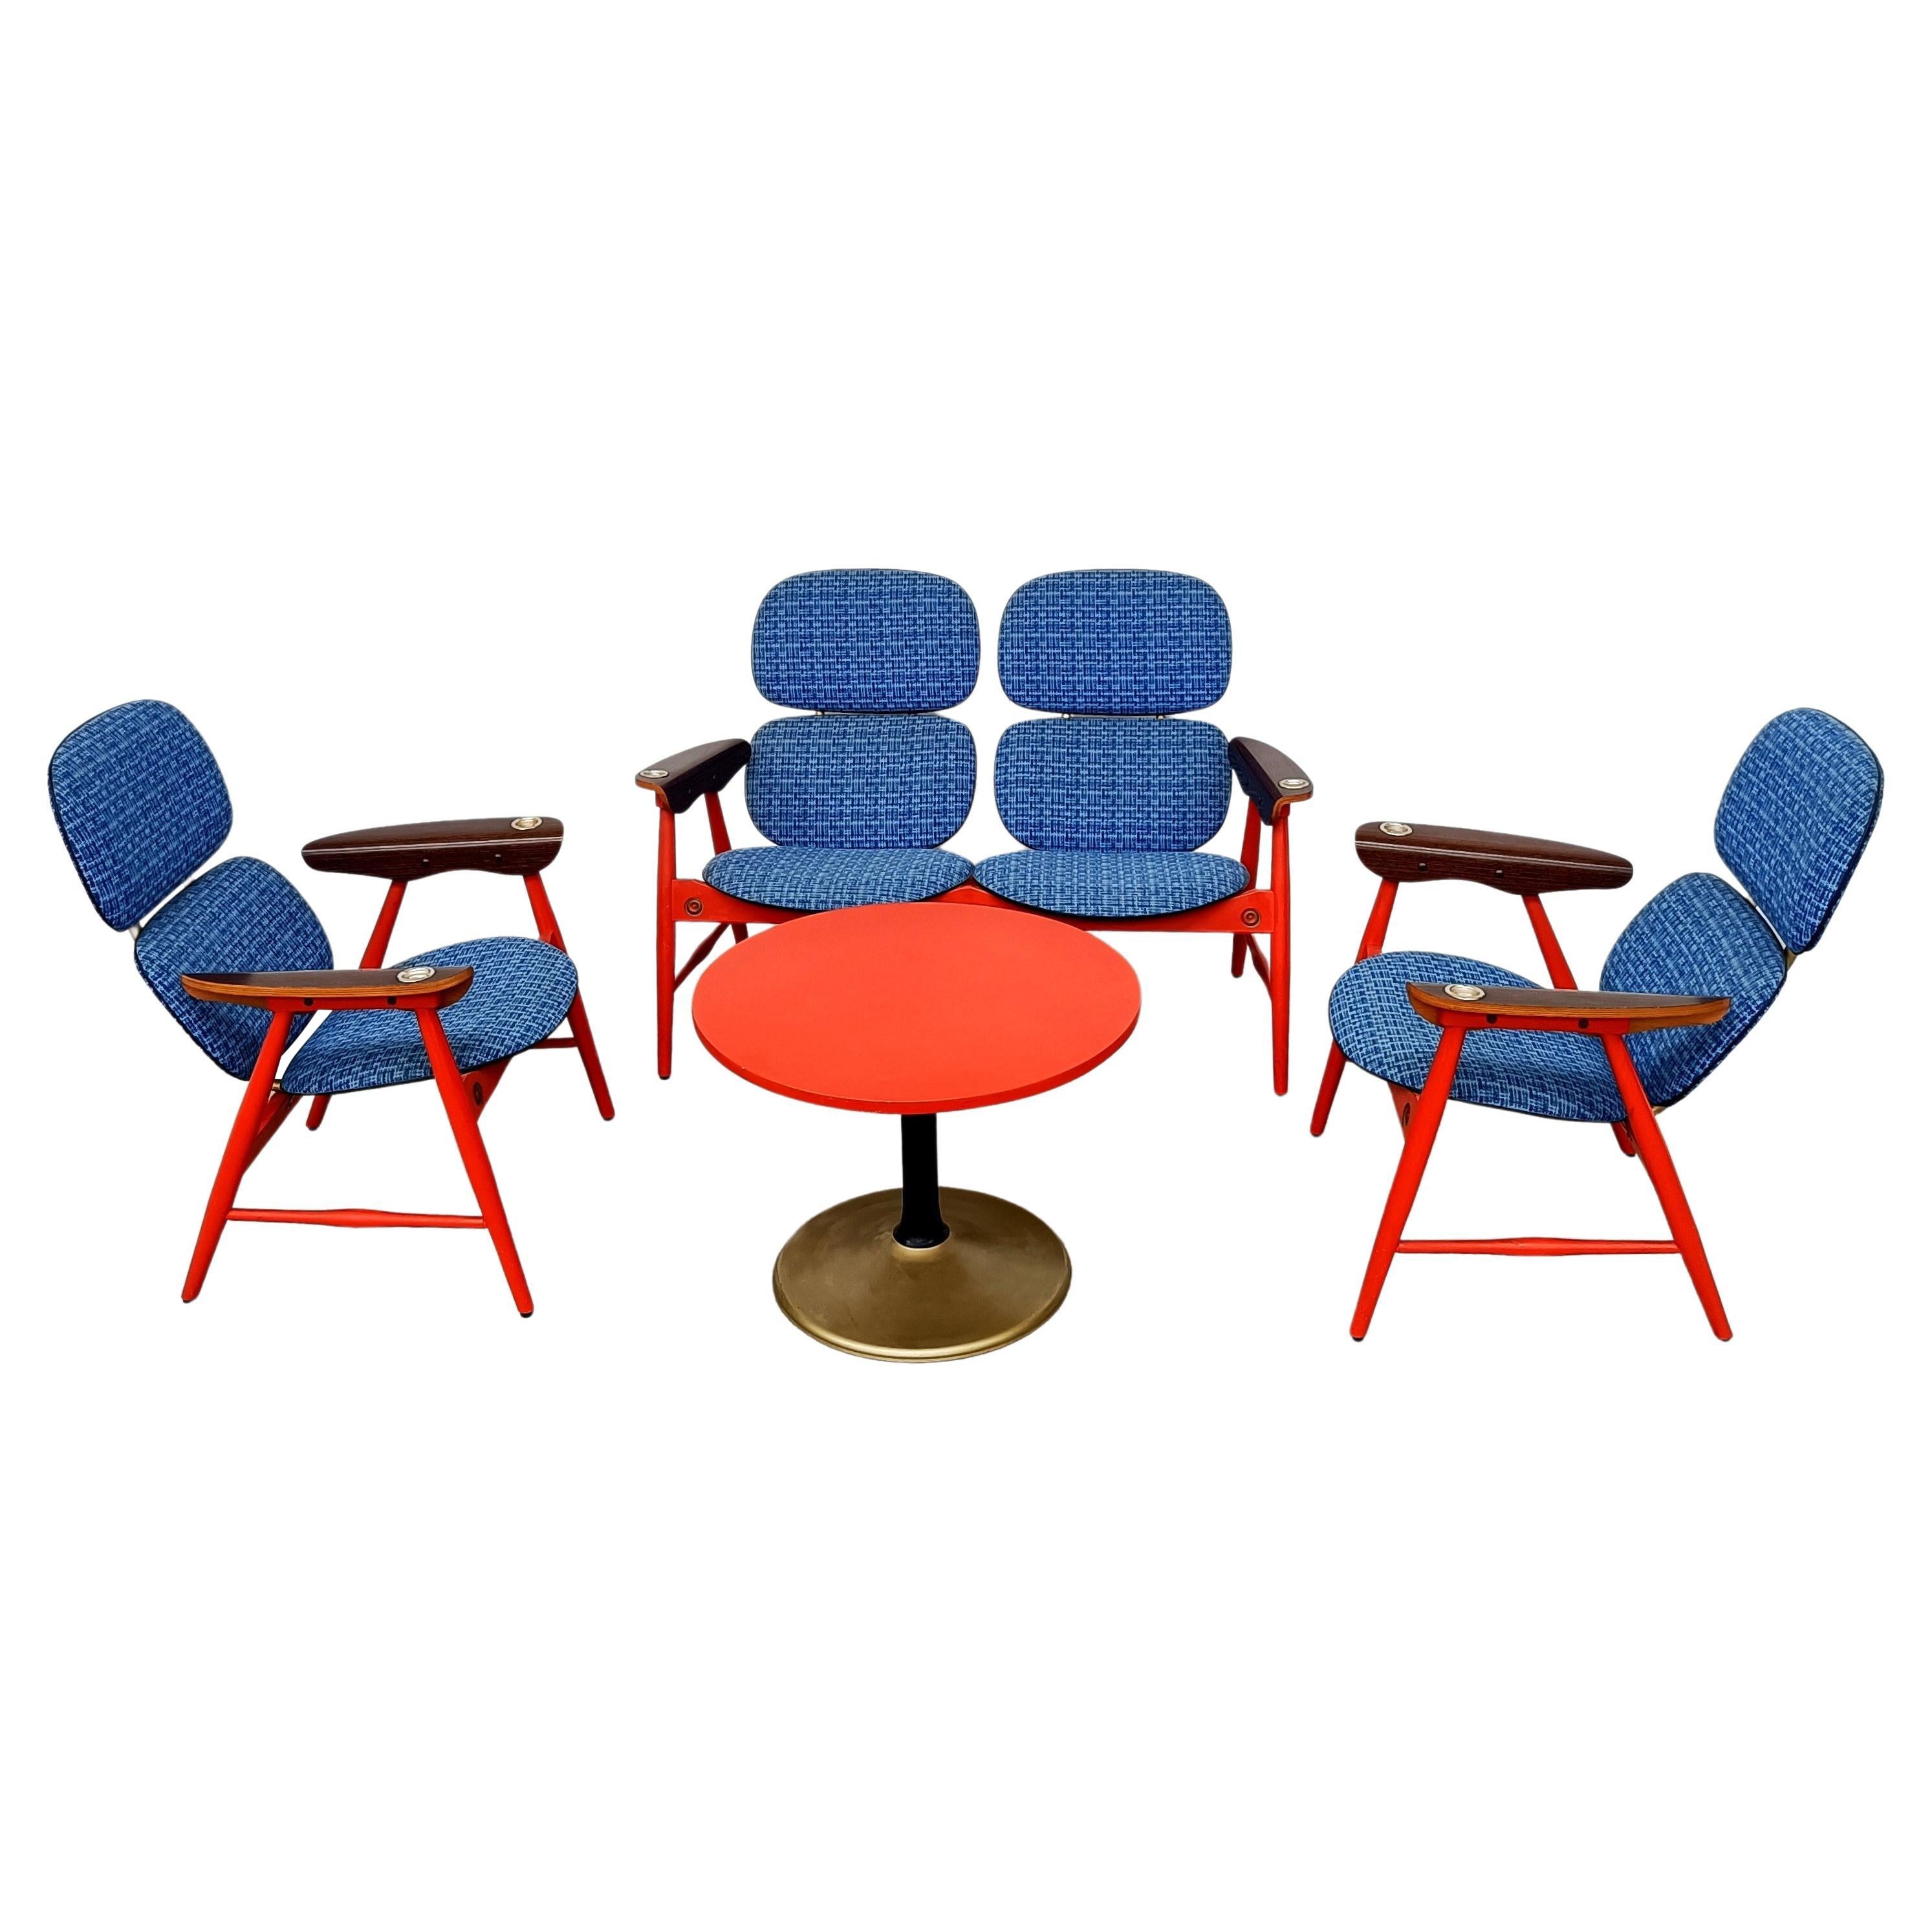 Living Room Set, Armchairs, Loveaseat Table by Marco Zanuso for Poltronova 60s For Sale